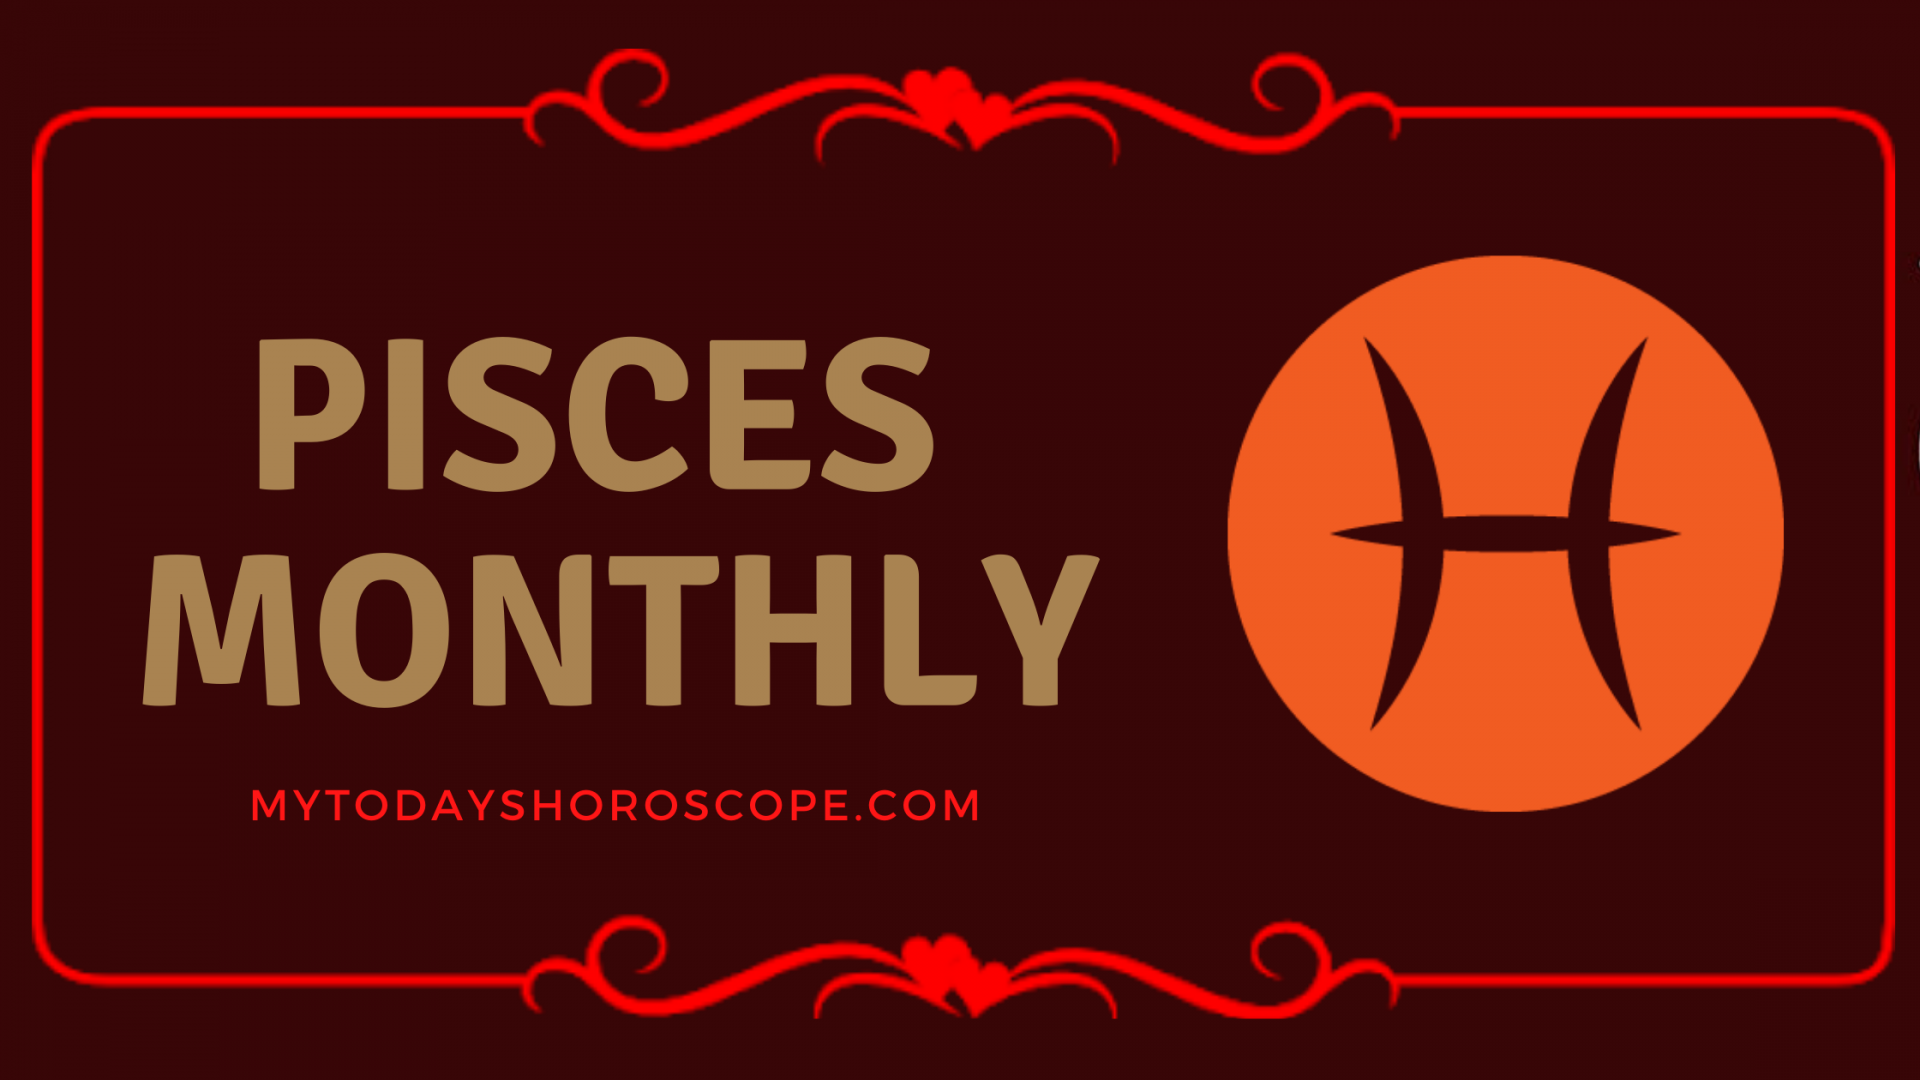 PISCES April Horoscope 2021 - Monthly Predictions for Love, Health, Career and Money